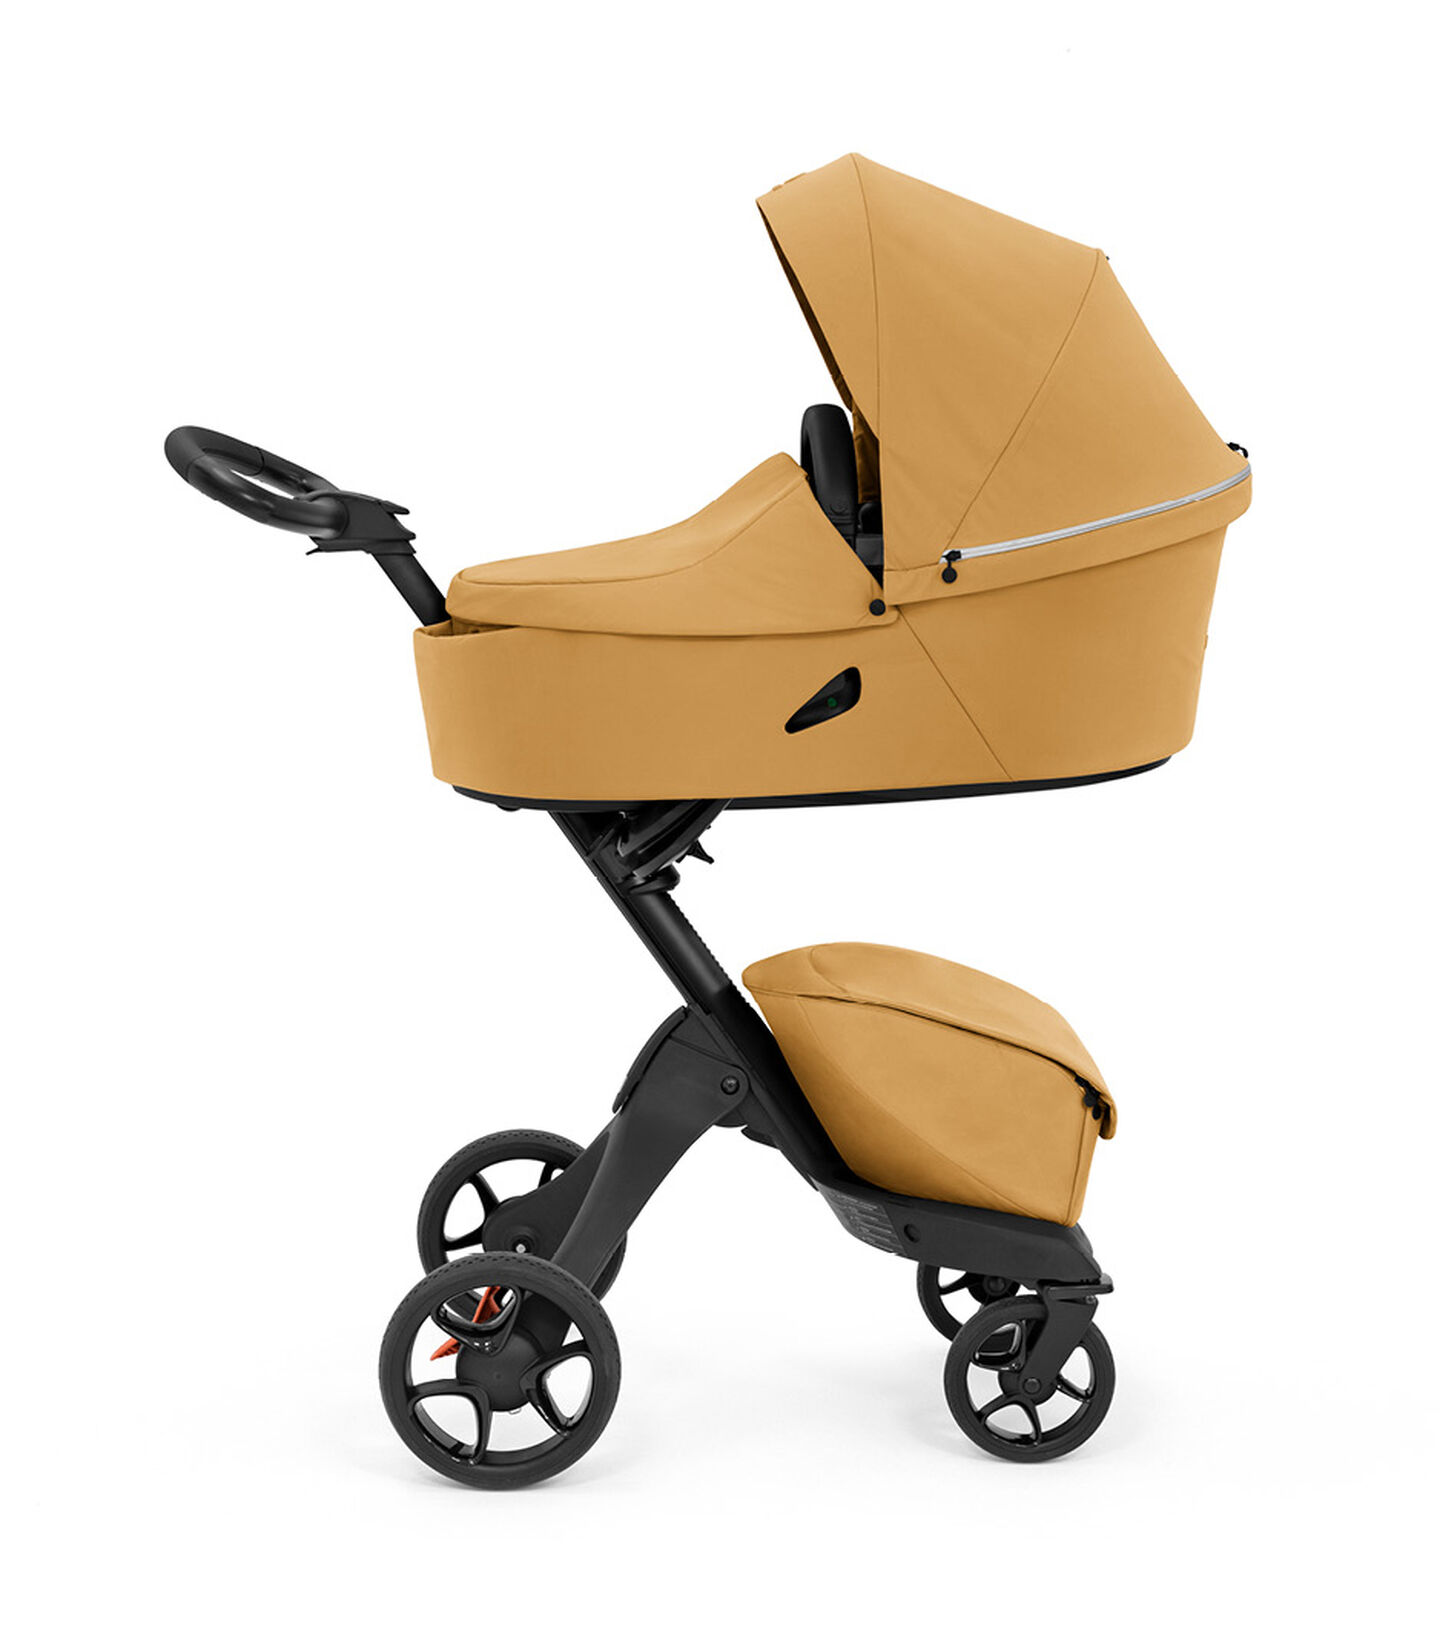 Stokke® Xplory® X liggedel Golden Yellow, Golden Yellow, mainview view 2